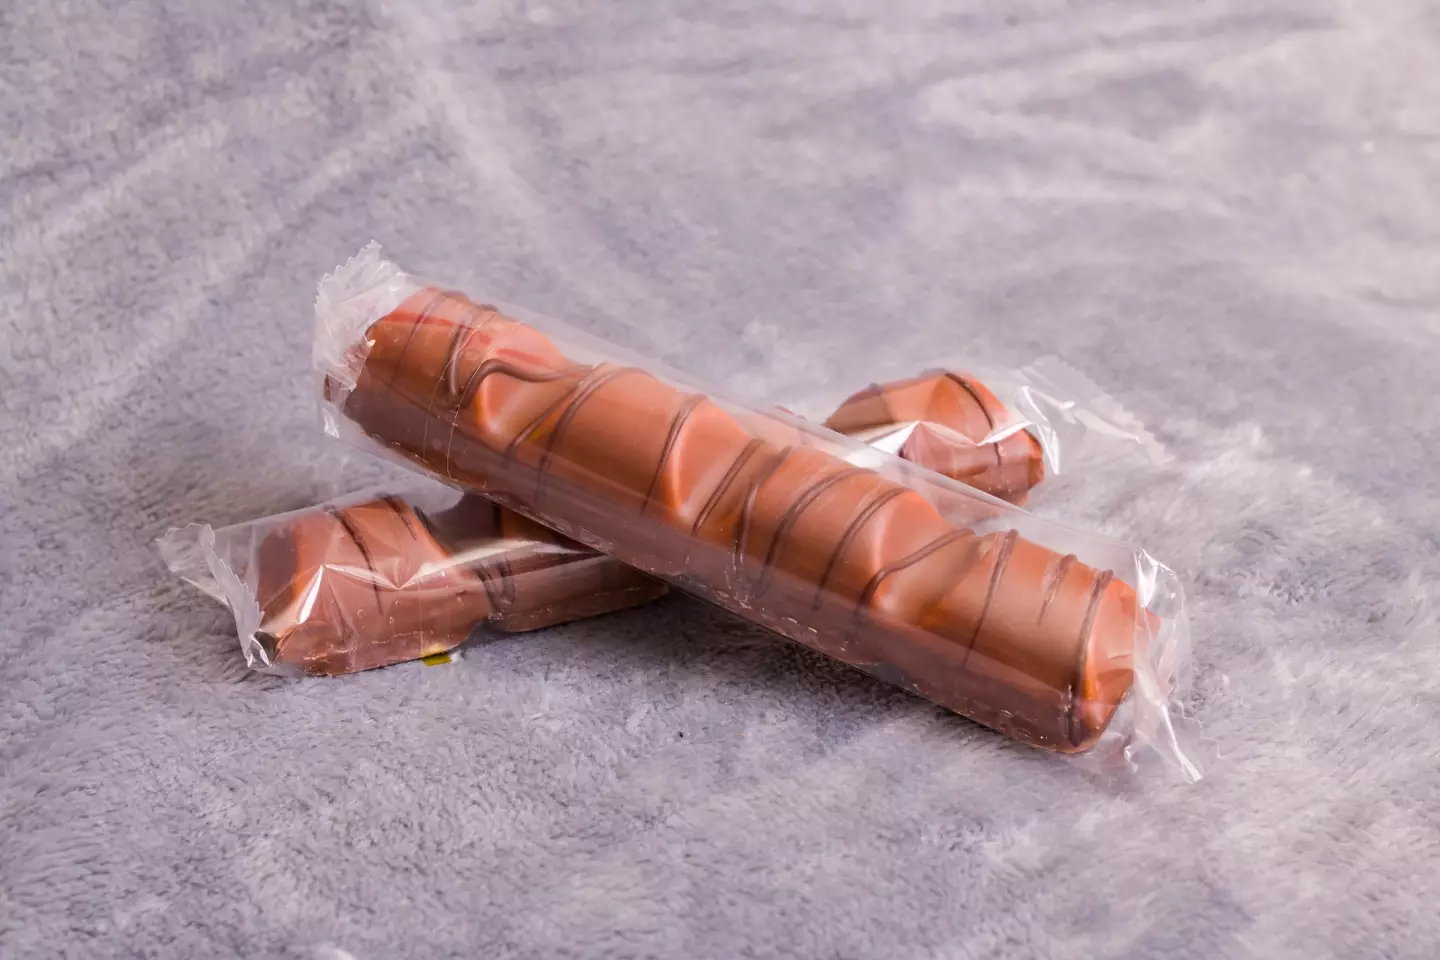 A whole Kinder Bueno bar is used for the mixture (